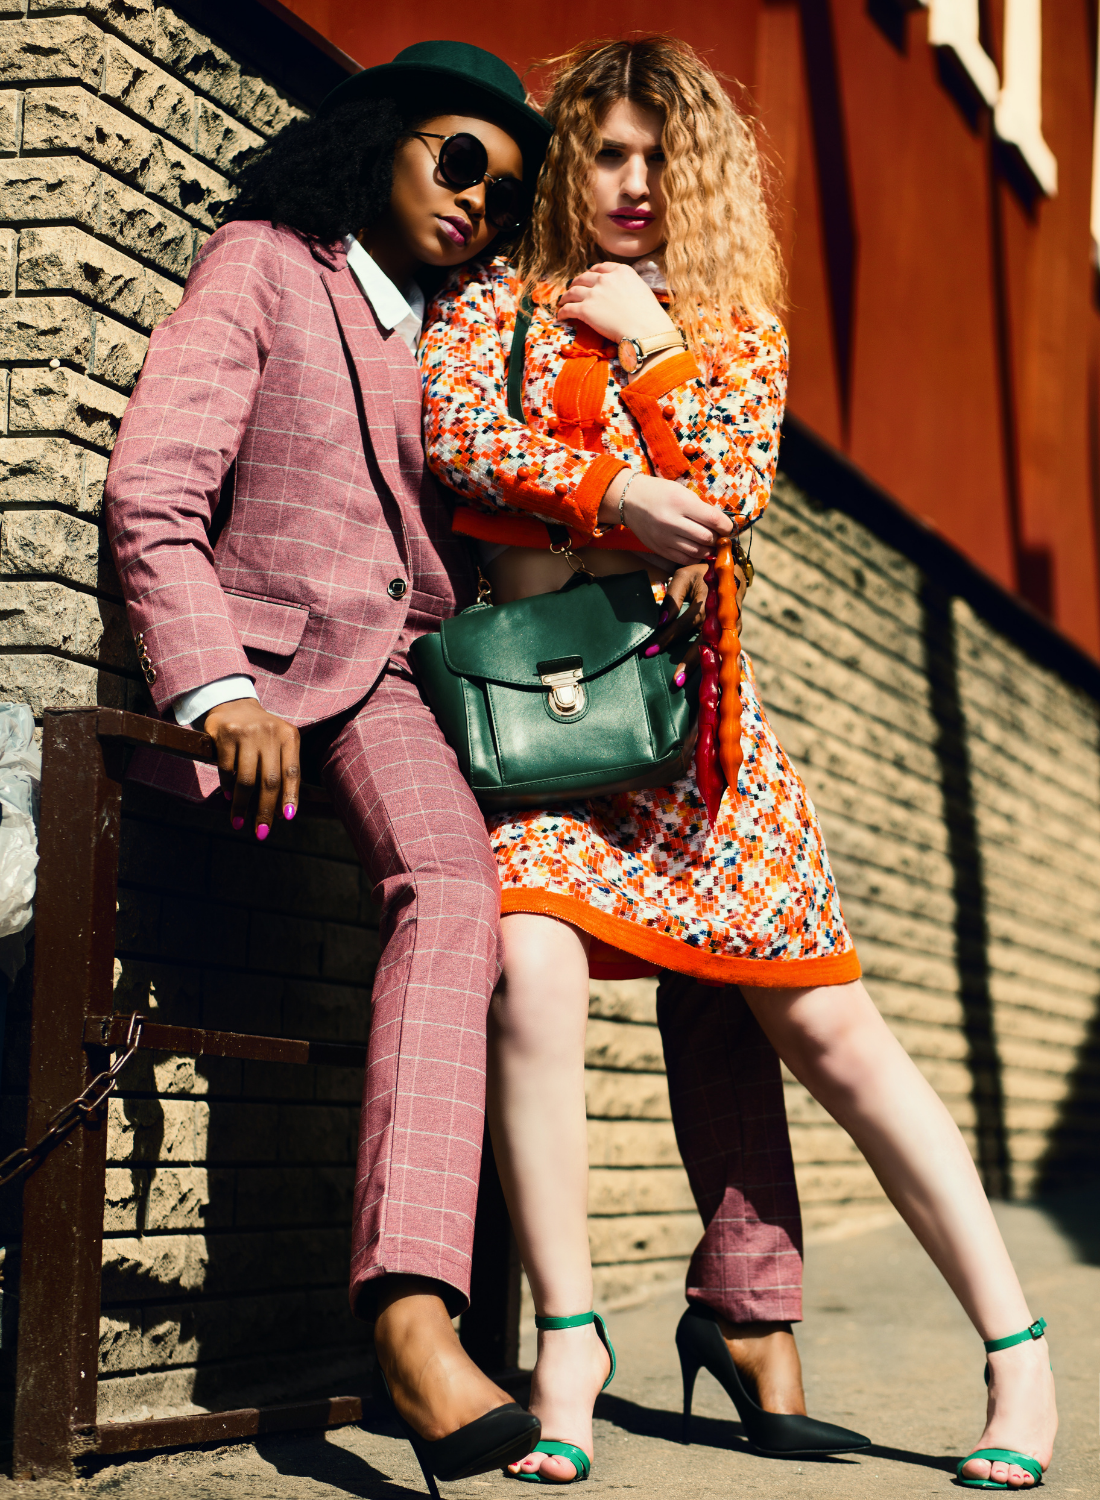 40 Cool Pics That Defined Hippie Style in the Mid-1960s and 1970s